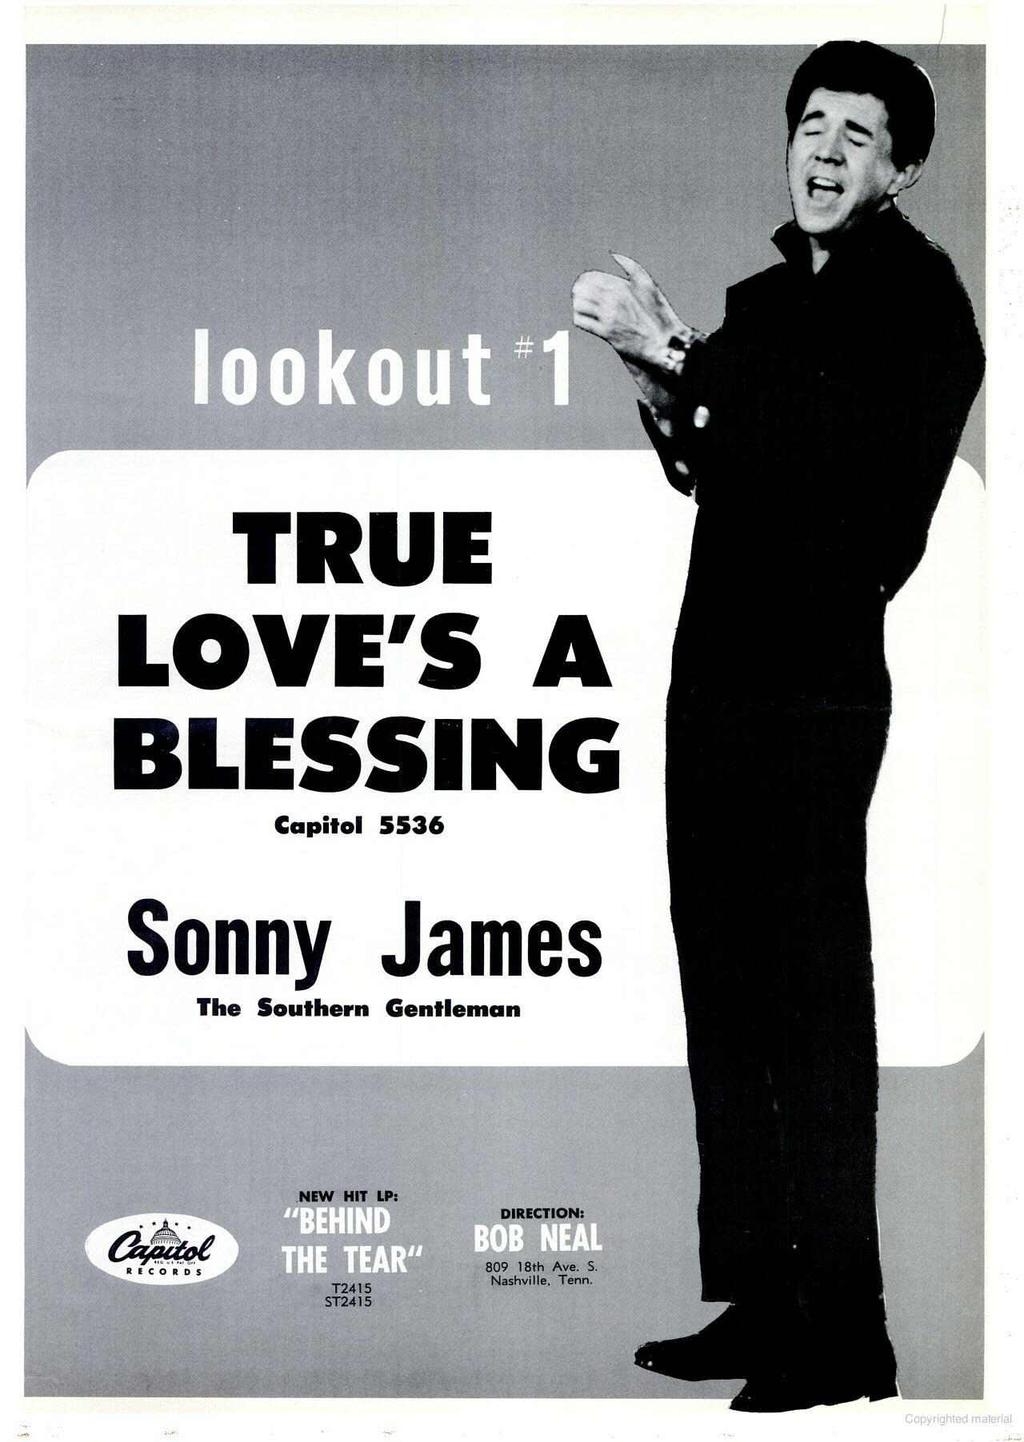 TRUE LOVE'S A BLESSING Capitol 5536 S onn Y James The Southern Gentleman